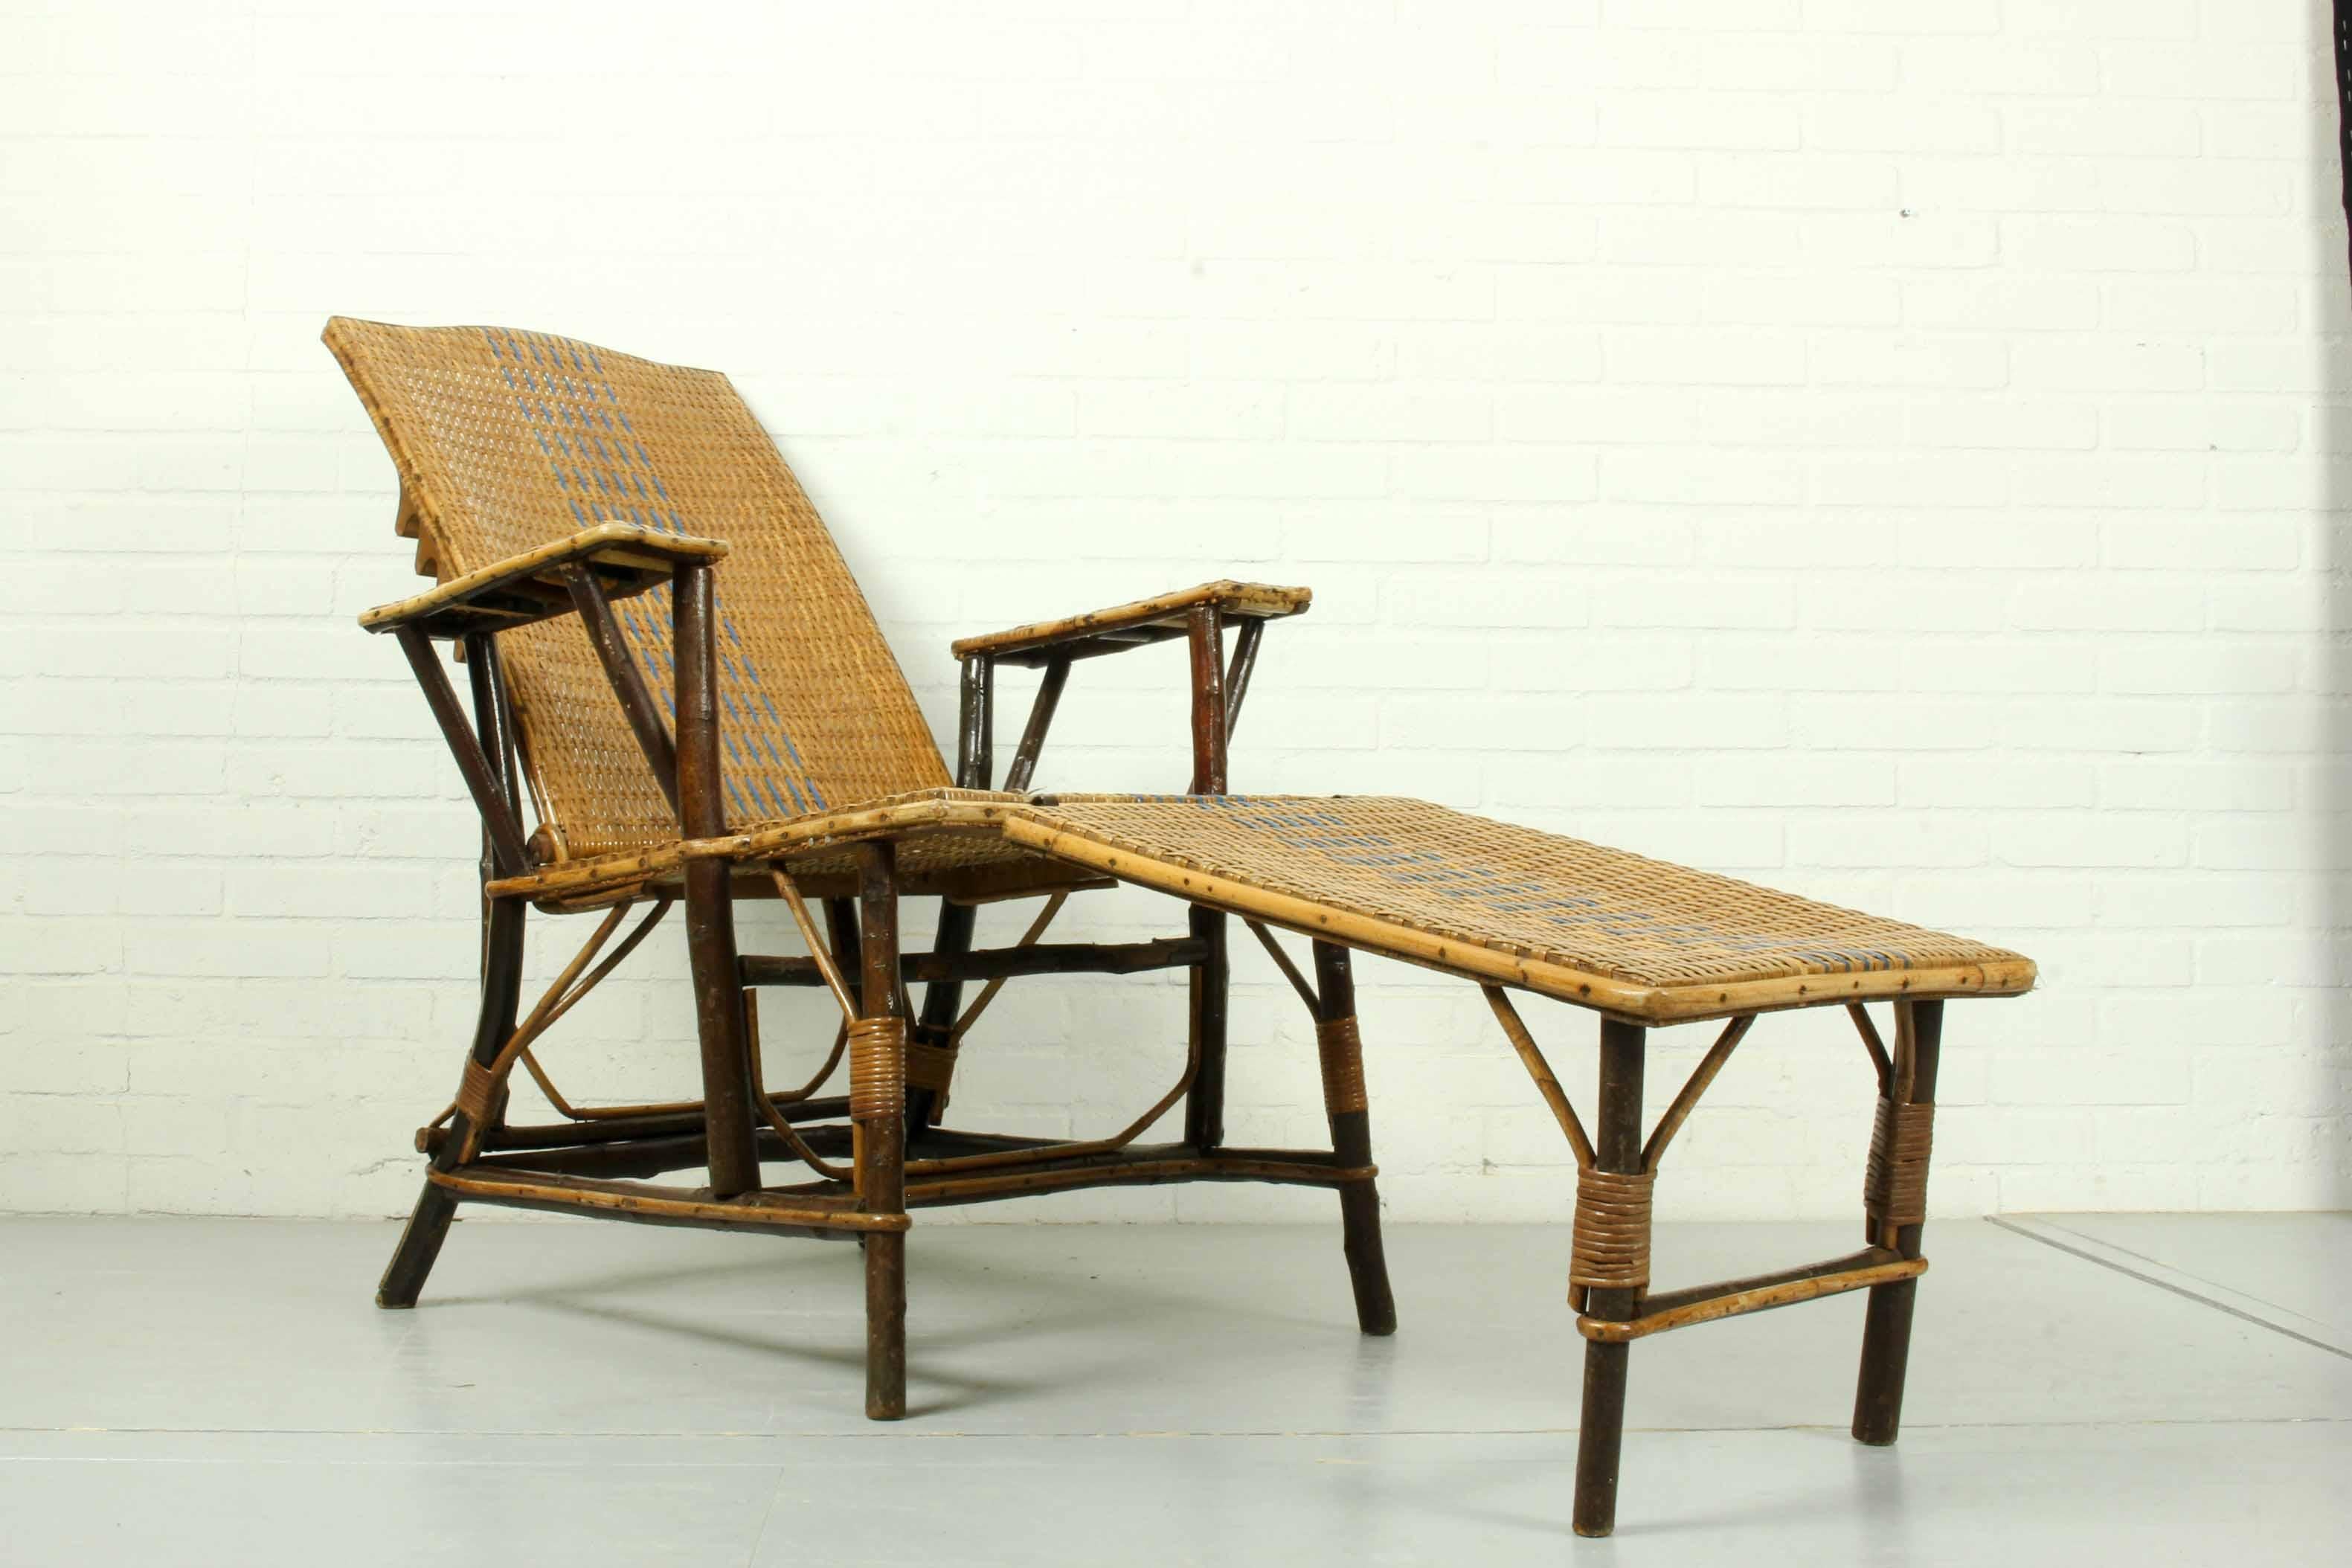 Early 20th Century Vintage Rattan Chaise Longue, ca 1920s